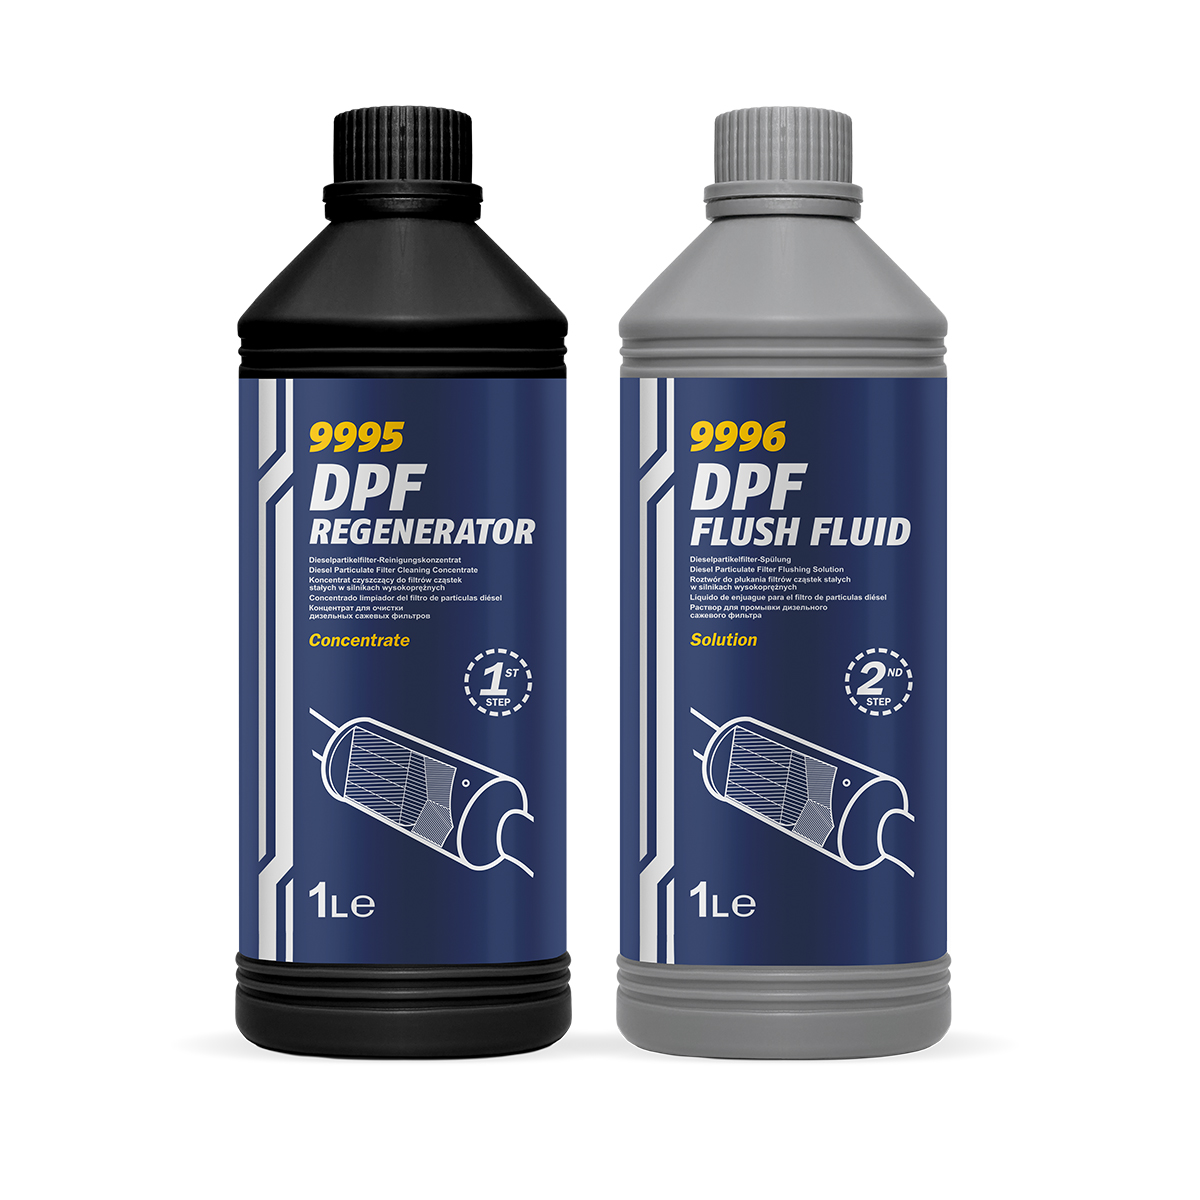 Diesel Particulate Filter (DPF) Cleaning, dpf 